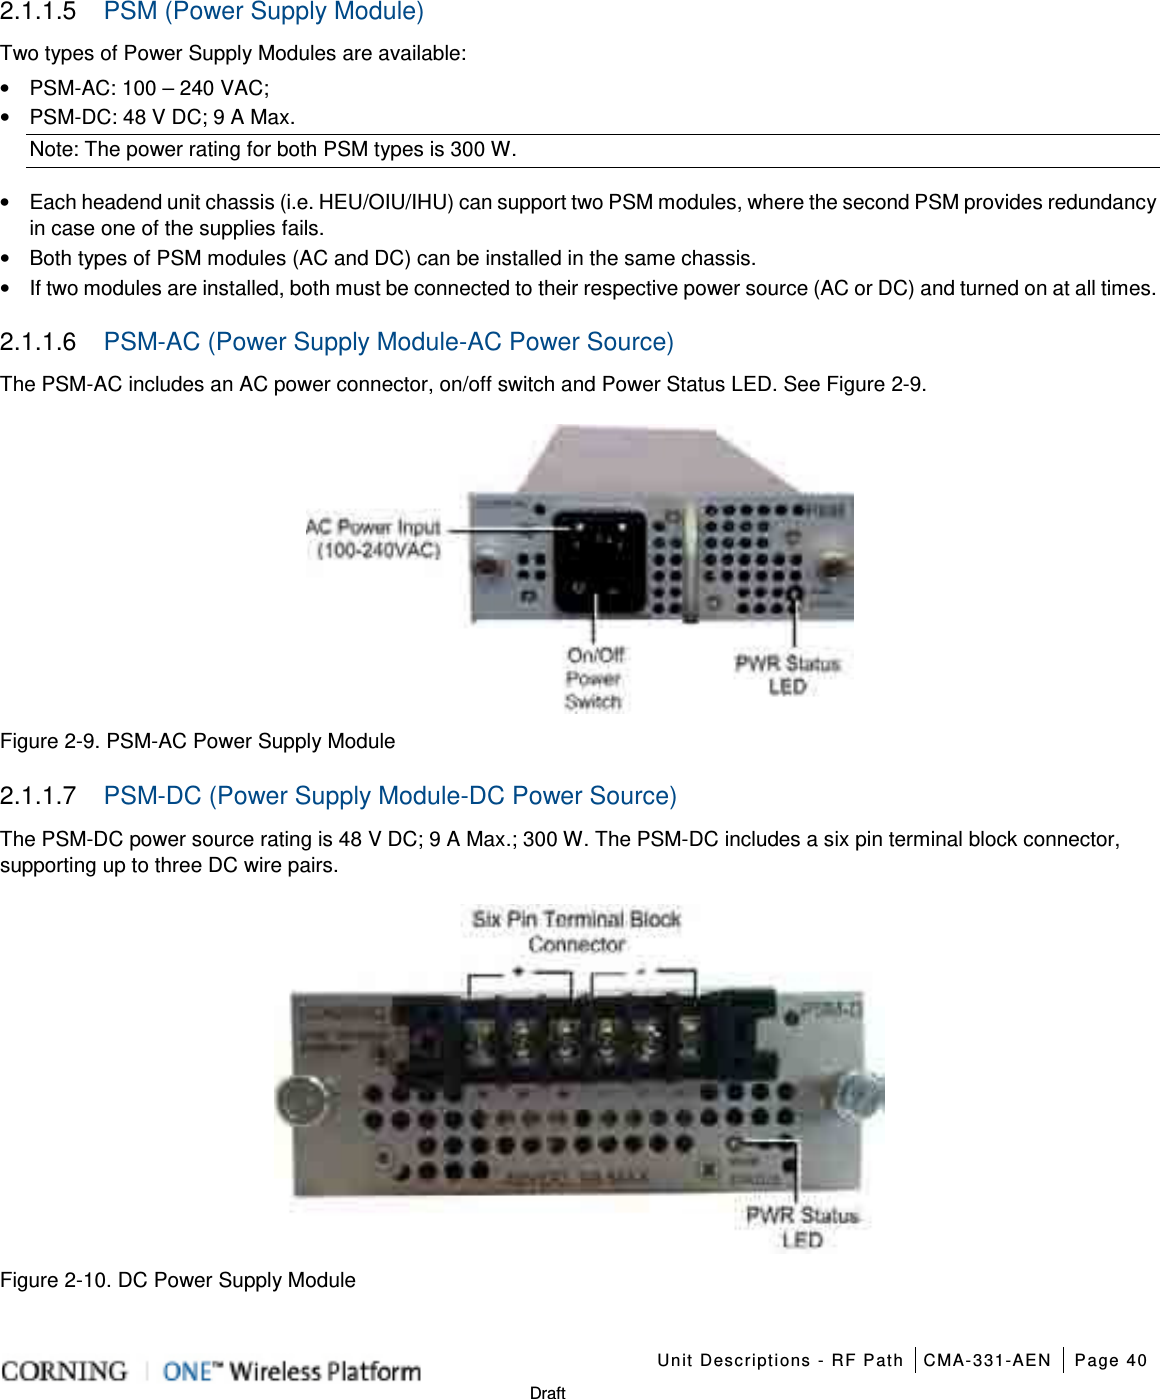    Unit Descriptions - RF Path CMA-331-AEN Page 40   Draft 2.1.1.5  PSM (Power Supply Module) Two types of Power Supply Modules are available: • PSM-AC: 100 – 240 VAC;   • PSM-DC: 48 V DC; 9 A Max. Note: The power rating for both PSM types is 300 W. • Each headend unit chassis (i.e. HEU/OIU/IHU) can support two PSM modules, where the second PSM provides redundancy in case one of the supplies fails. • Both types of PSM modules (AC and DC) can be installed in the same chassis. • If two modules are installed, both must be connected to their respective power source (AC or DC) and turned on at all times. 2.1.1.6  PSM-AC (Power Supply Module-AC Power Source) The PSM-AC includes an AC power connector, on/off switch and Power Status LED. See Figure  2-9.  Figure  2-9. PSM-AC Power Supply Module 2.1.1.7  PSM-DC (Power Supply Module-DC Power Source) The PSM-DC power source rating is 48 V DC; 9 A Max.; 300 W. The PSM-DC includes a six pin terminal block connector, supporting up to three DC wire pairs.    Figure  2-10. DC Power Supply Module  